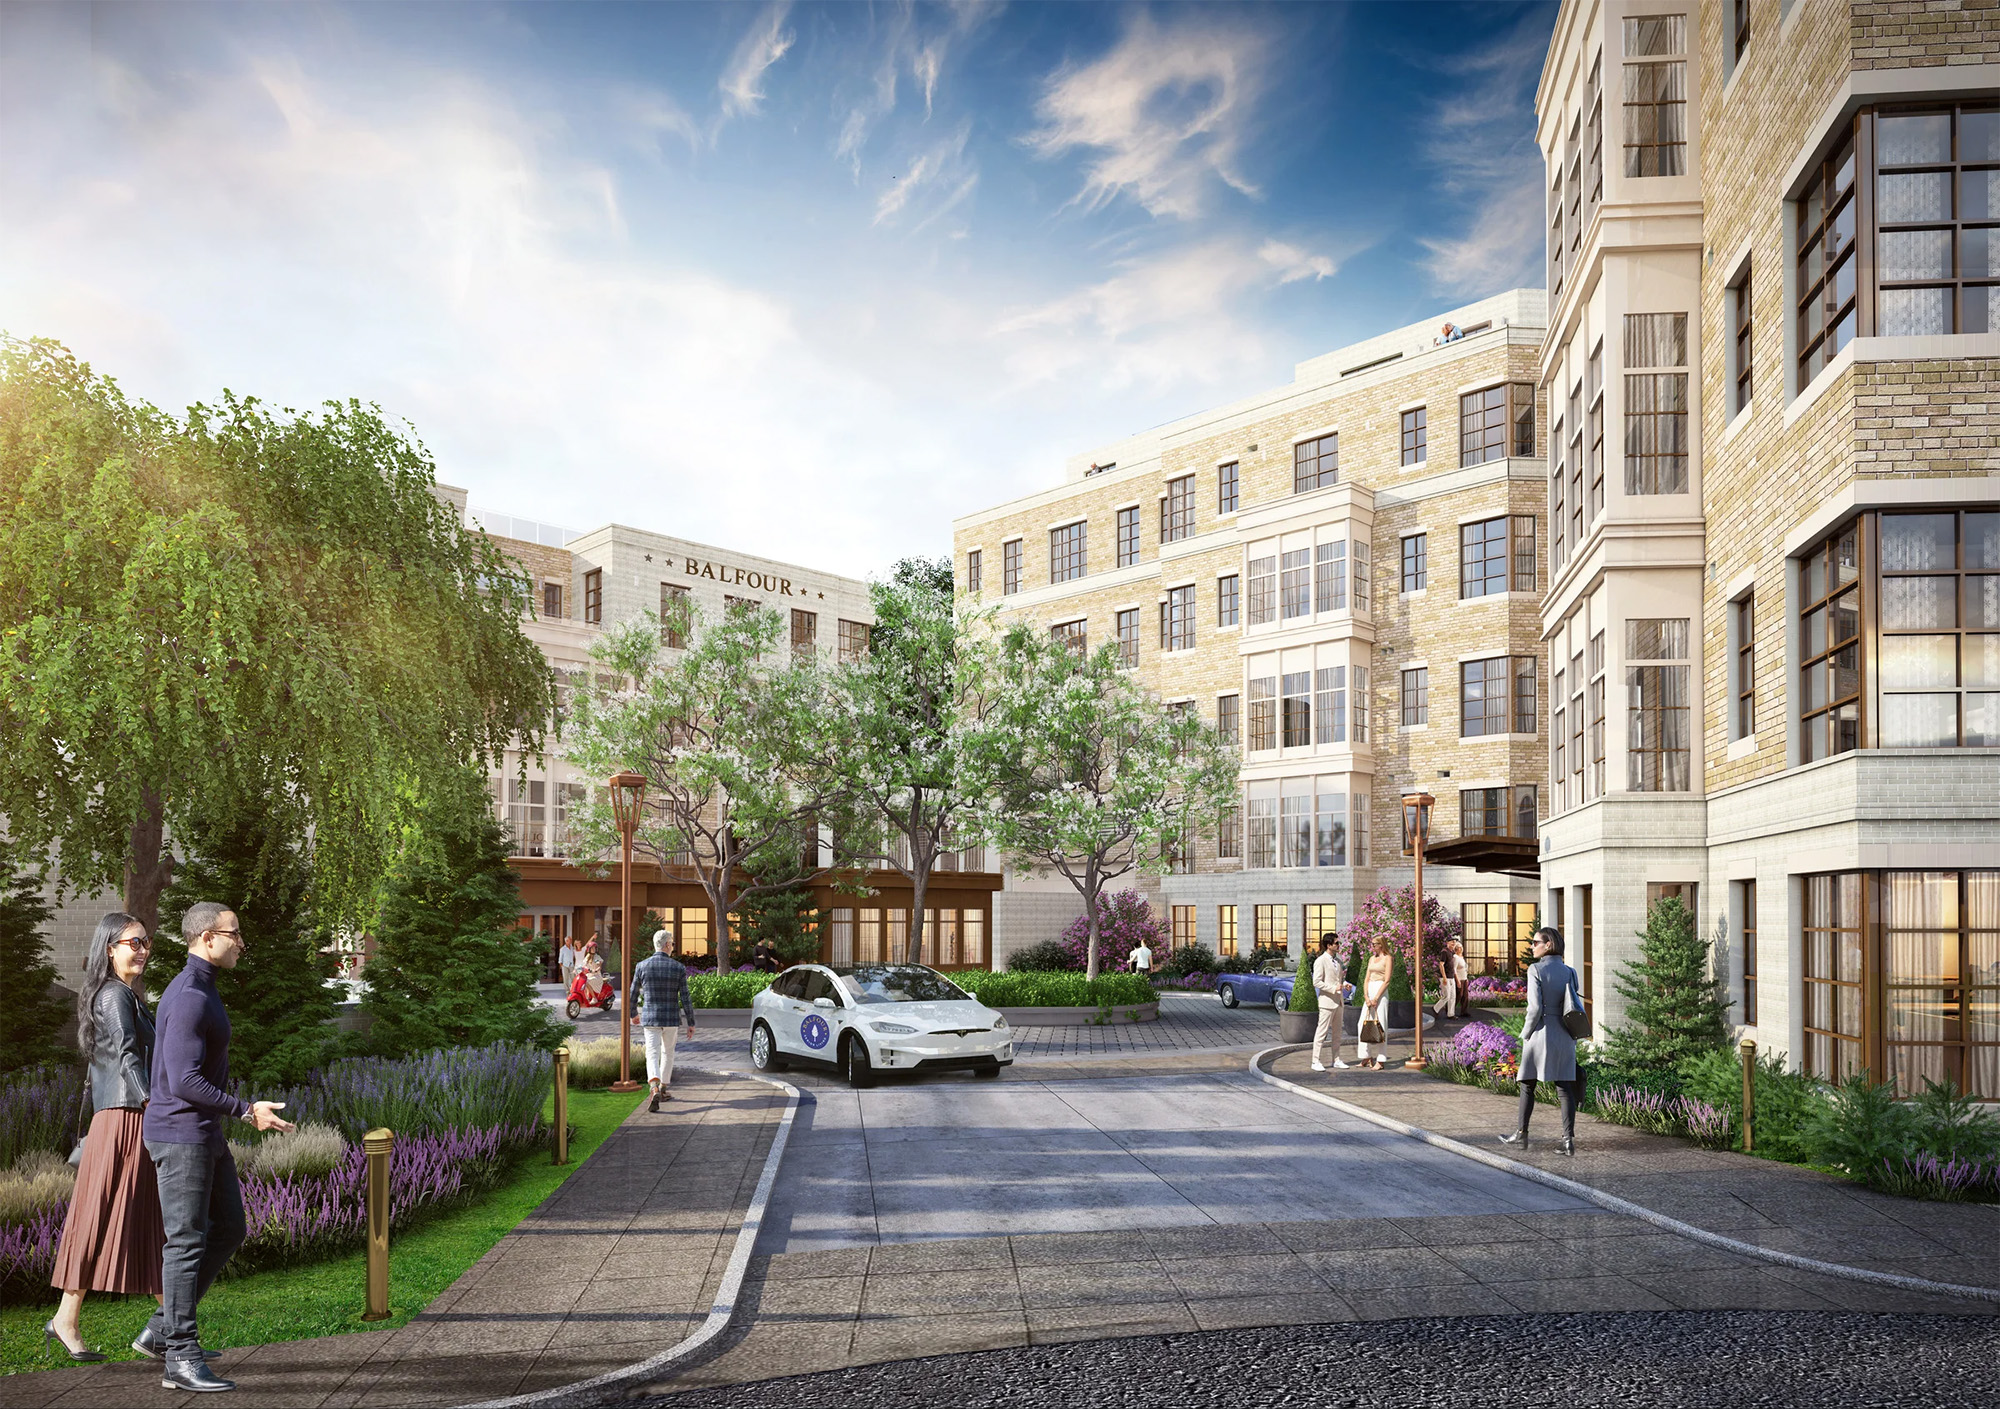 The Fitzgerald, a senior living community, is replacing a former grocery store in Washington, DC’s Palisades neighborhood. Its design draws inspiration from DC’s classic, prewar apartment houses.